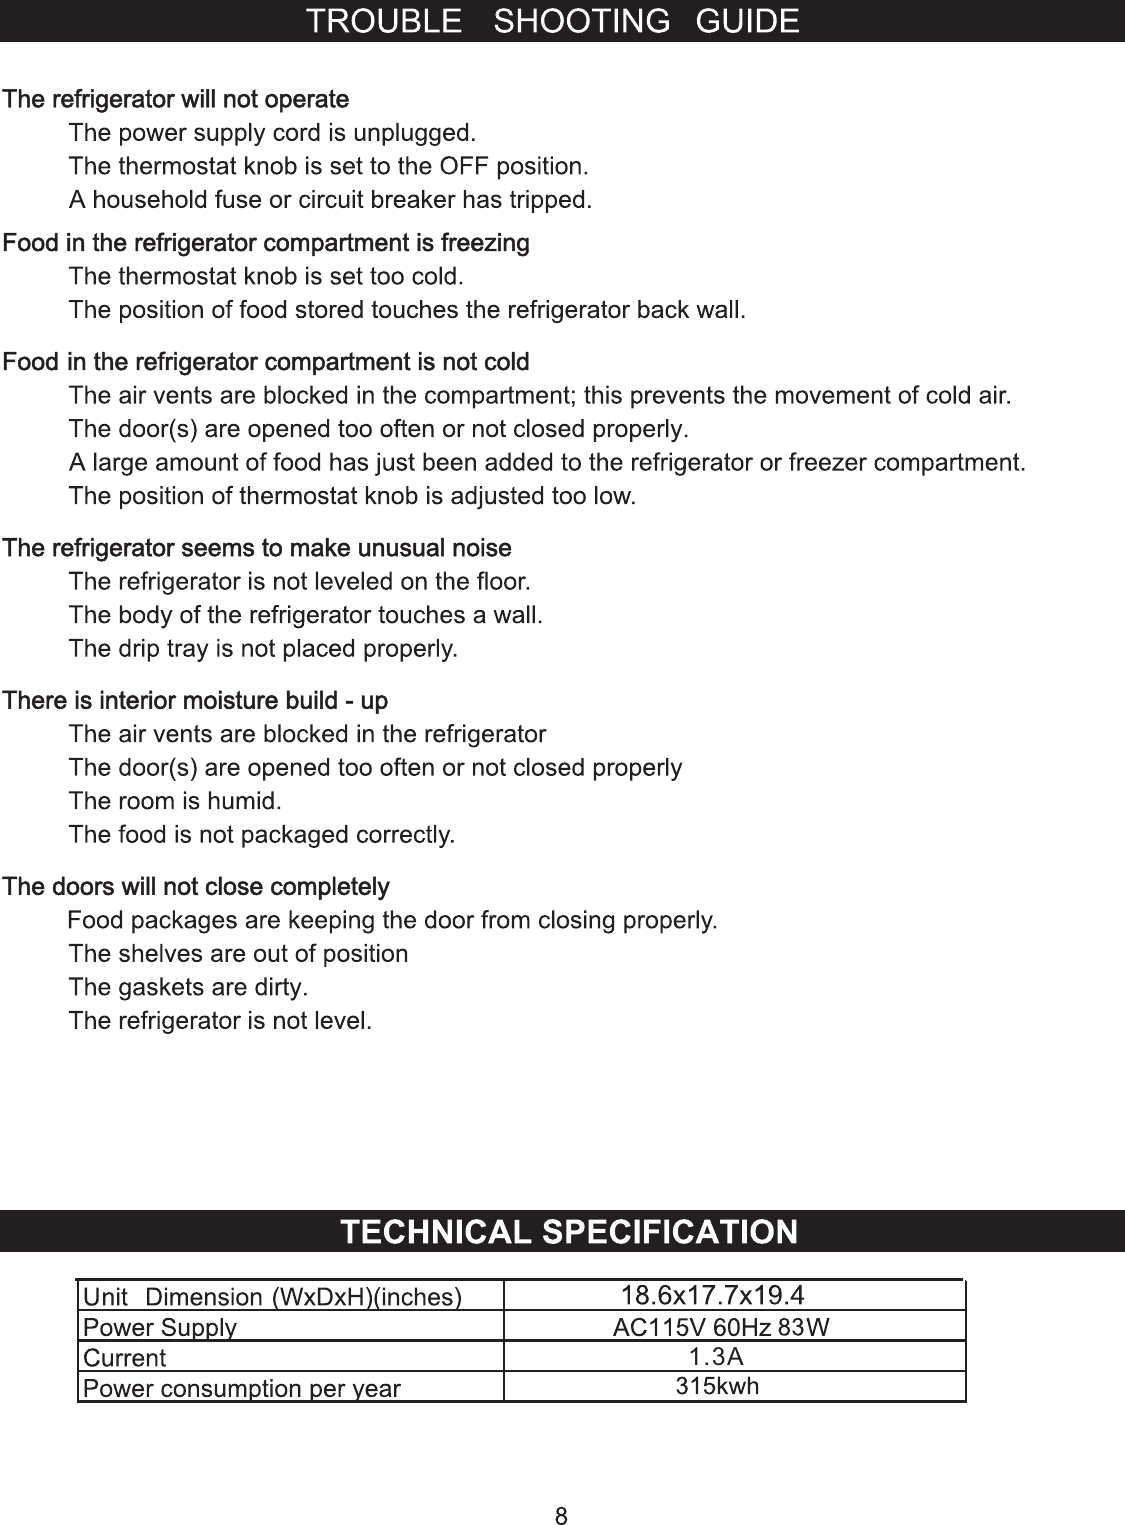 Page 8 of 11 - Emerson Emerson-Cr180-Users-Manual-  Emerson-cr180-users-manual